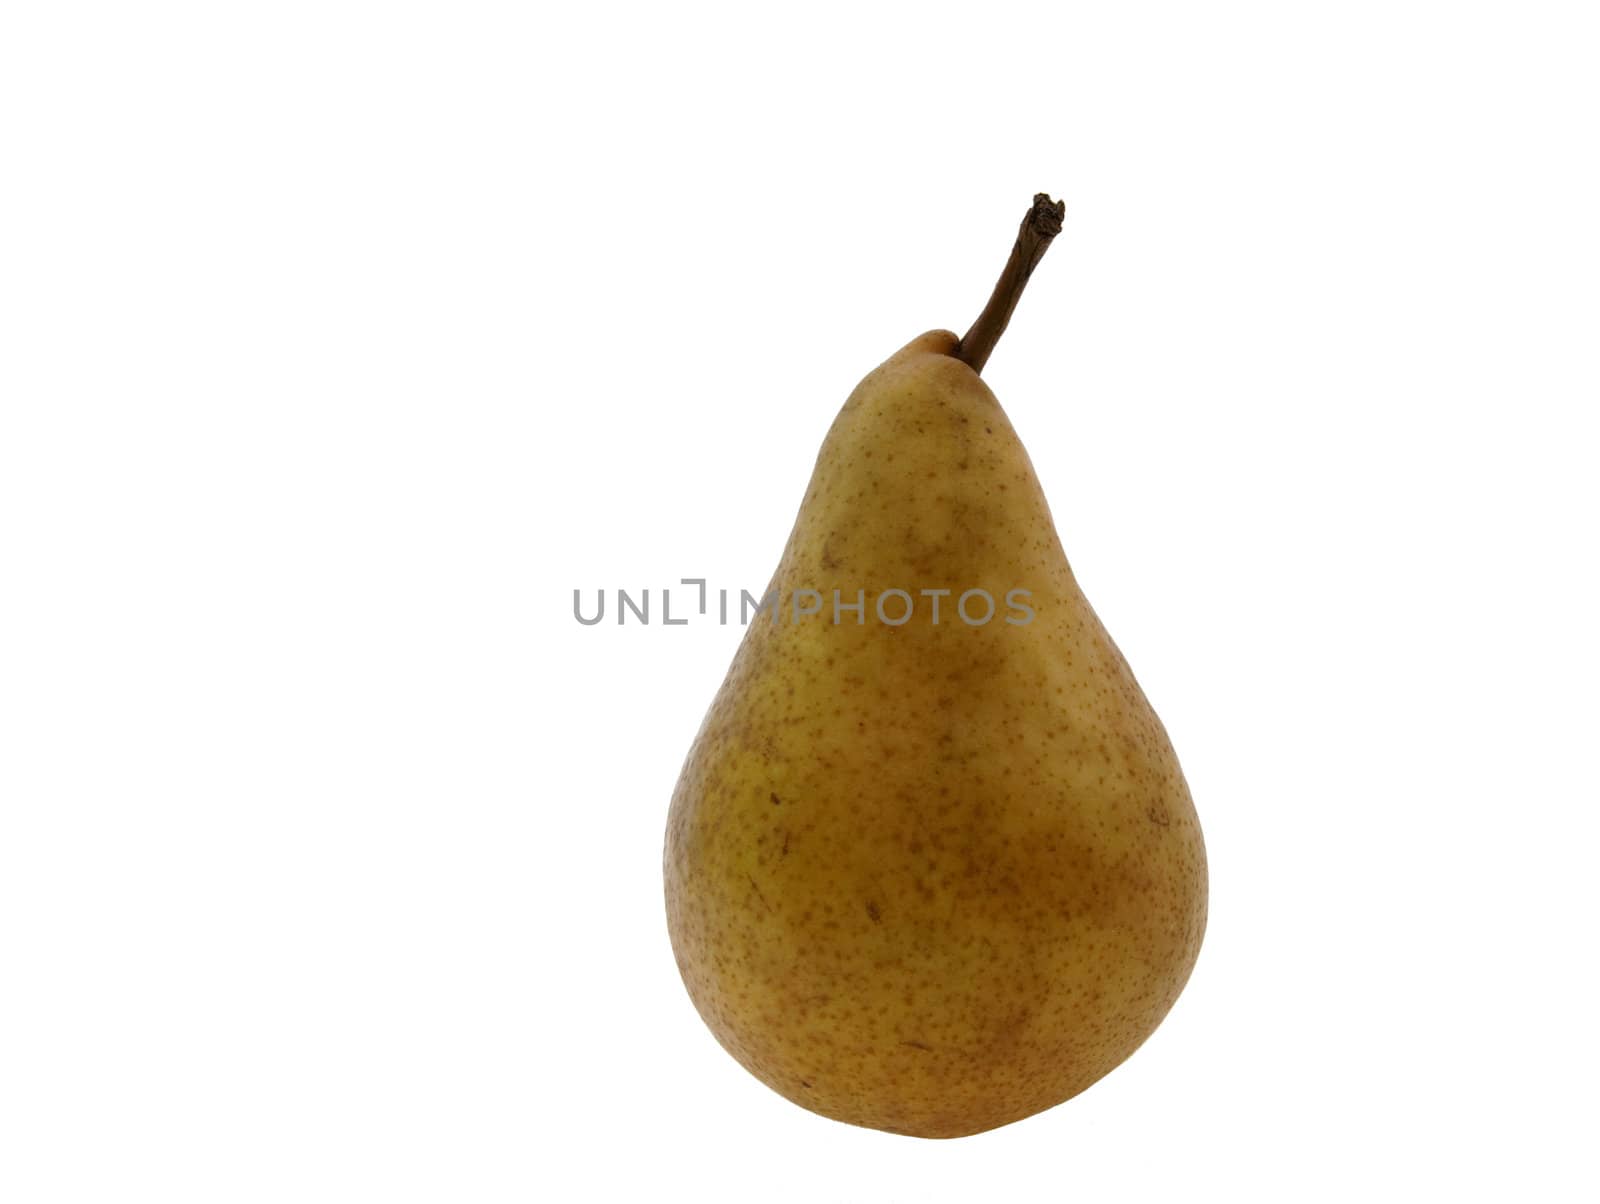 The picture of the nice  tasty pear